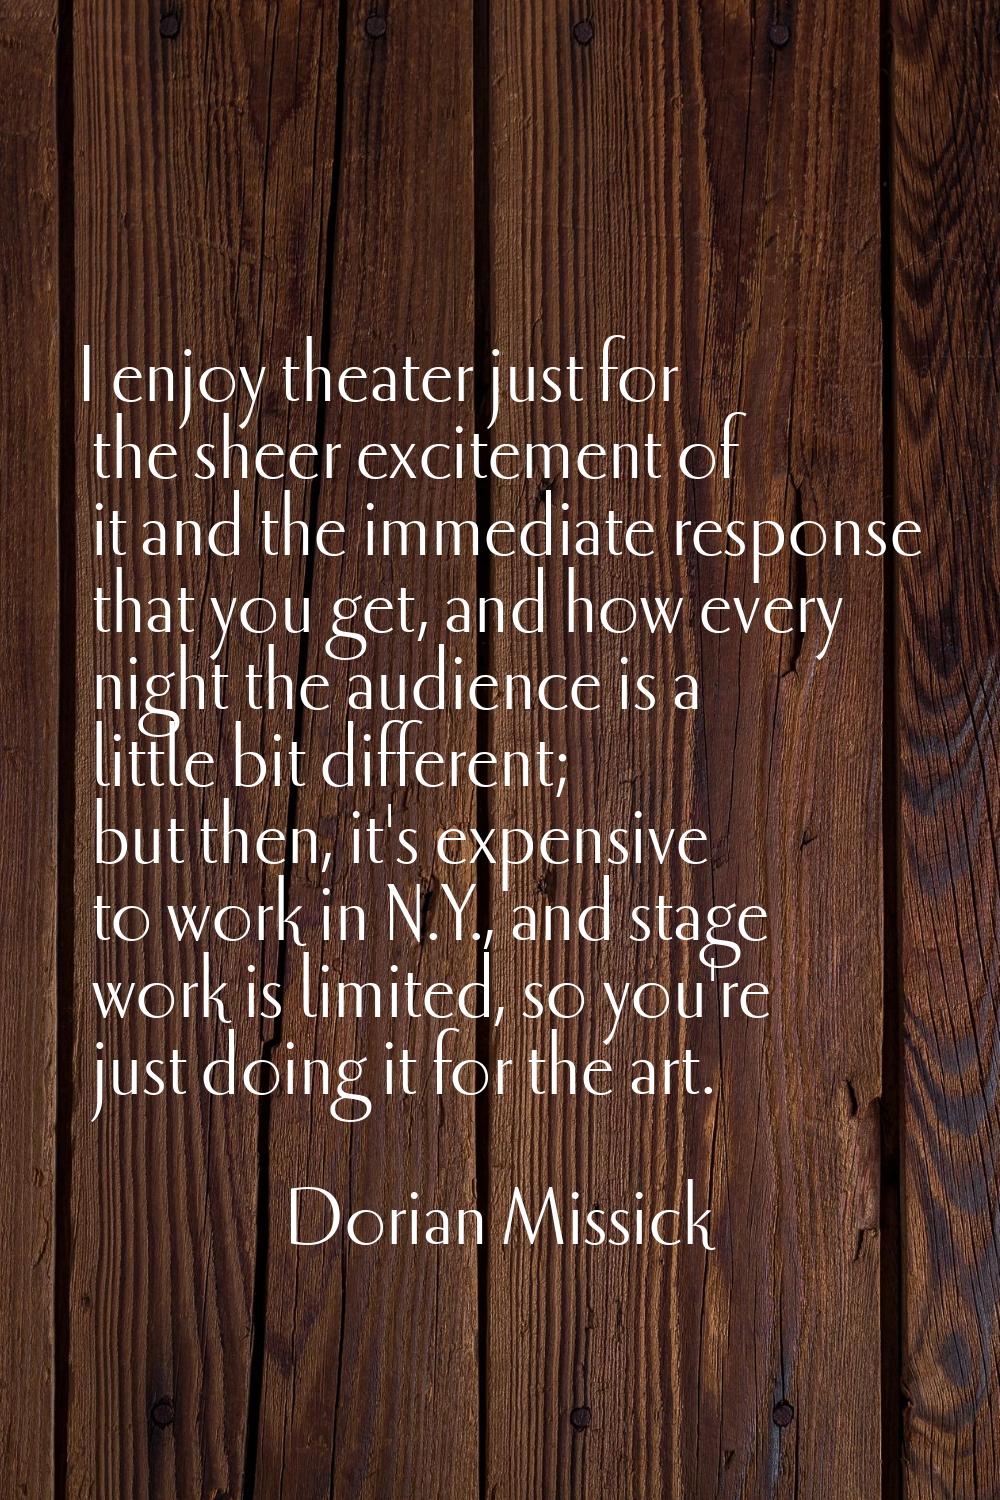 I enjoy theater just for the sheer excitement of it and the immediate response that you get, and ho